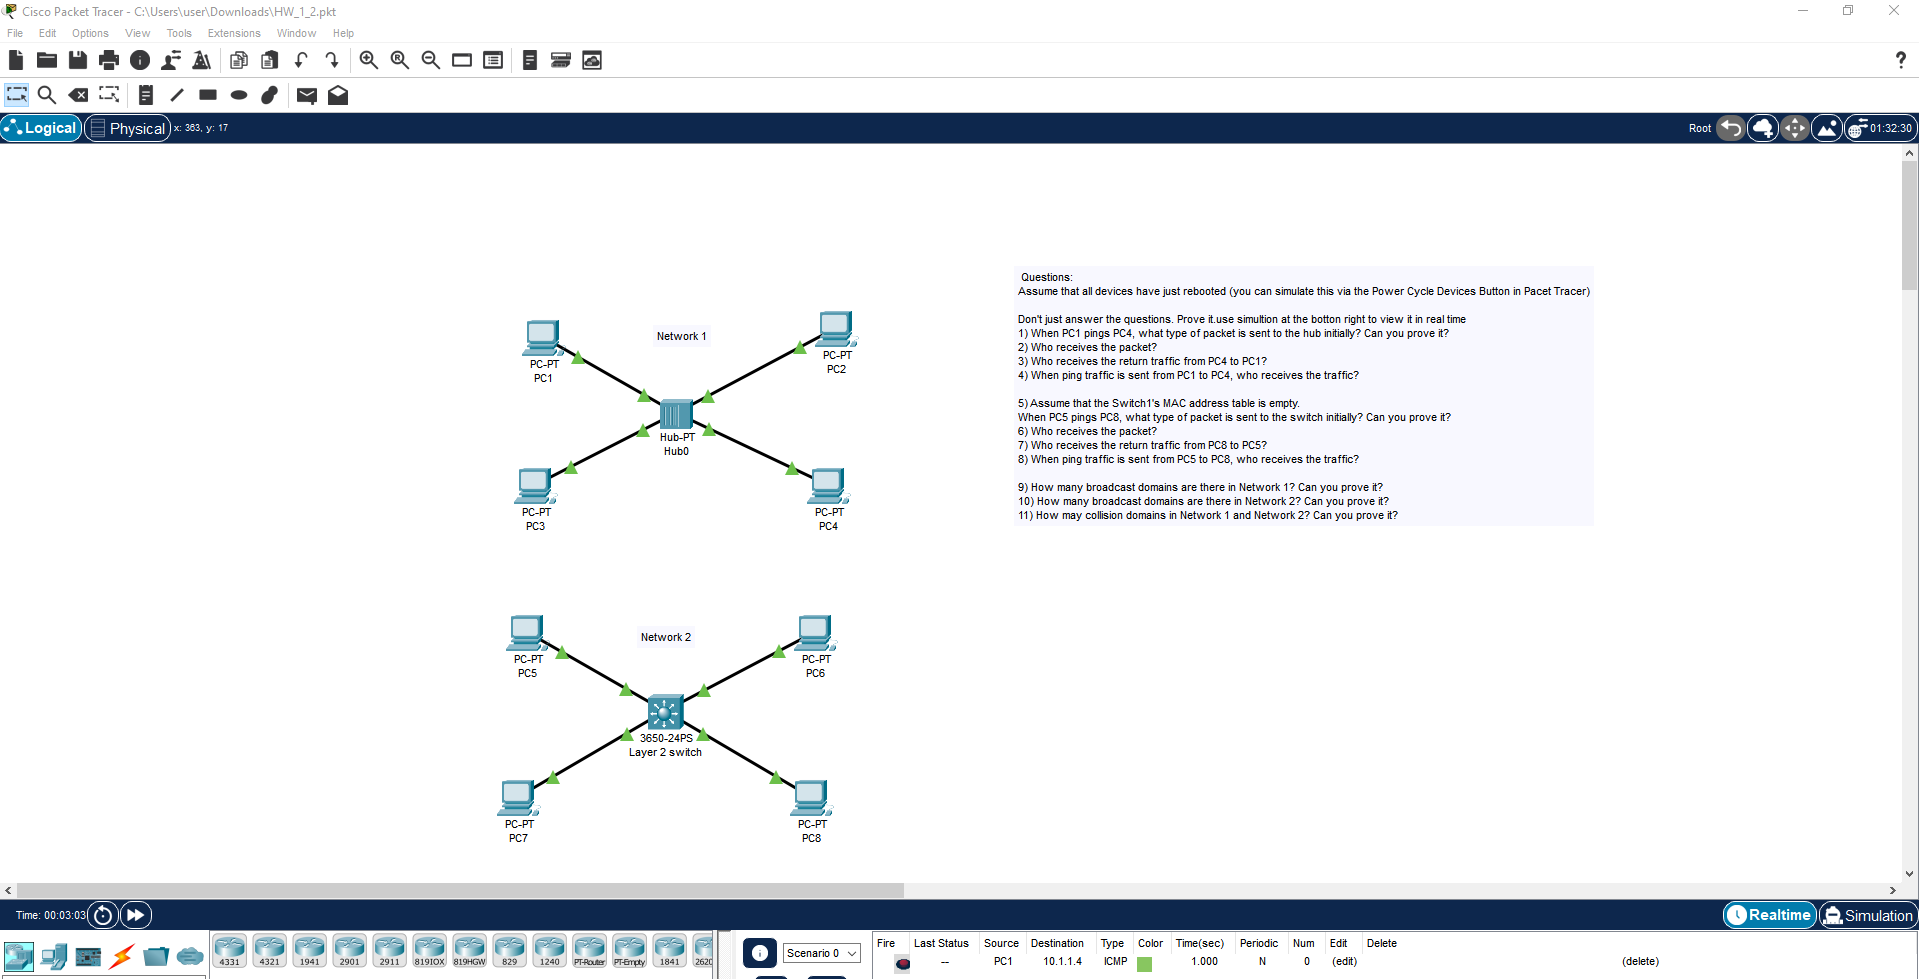 Cisco Packet Tracer - C:\Users\user\Downloads\HW_1_2.pkt File Edit Options View Tools Extensions Window Help